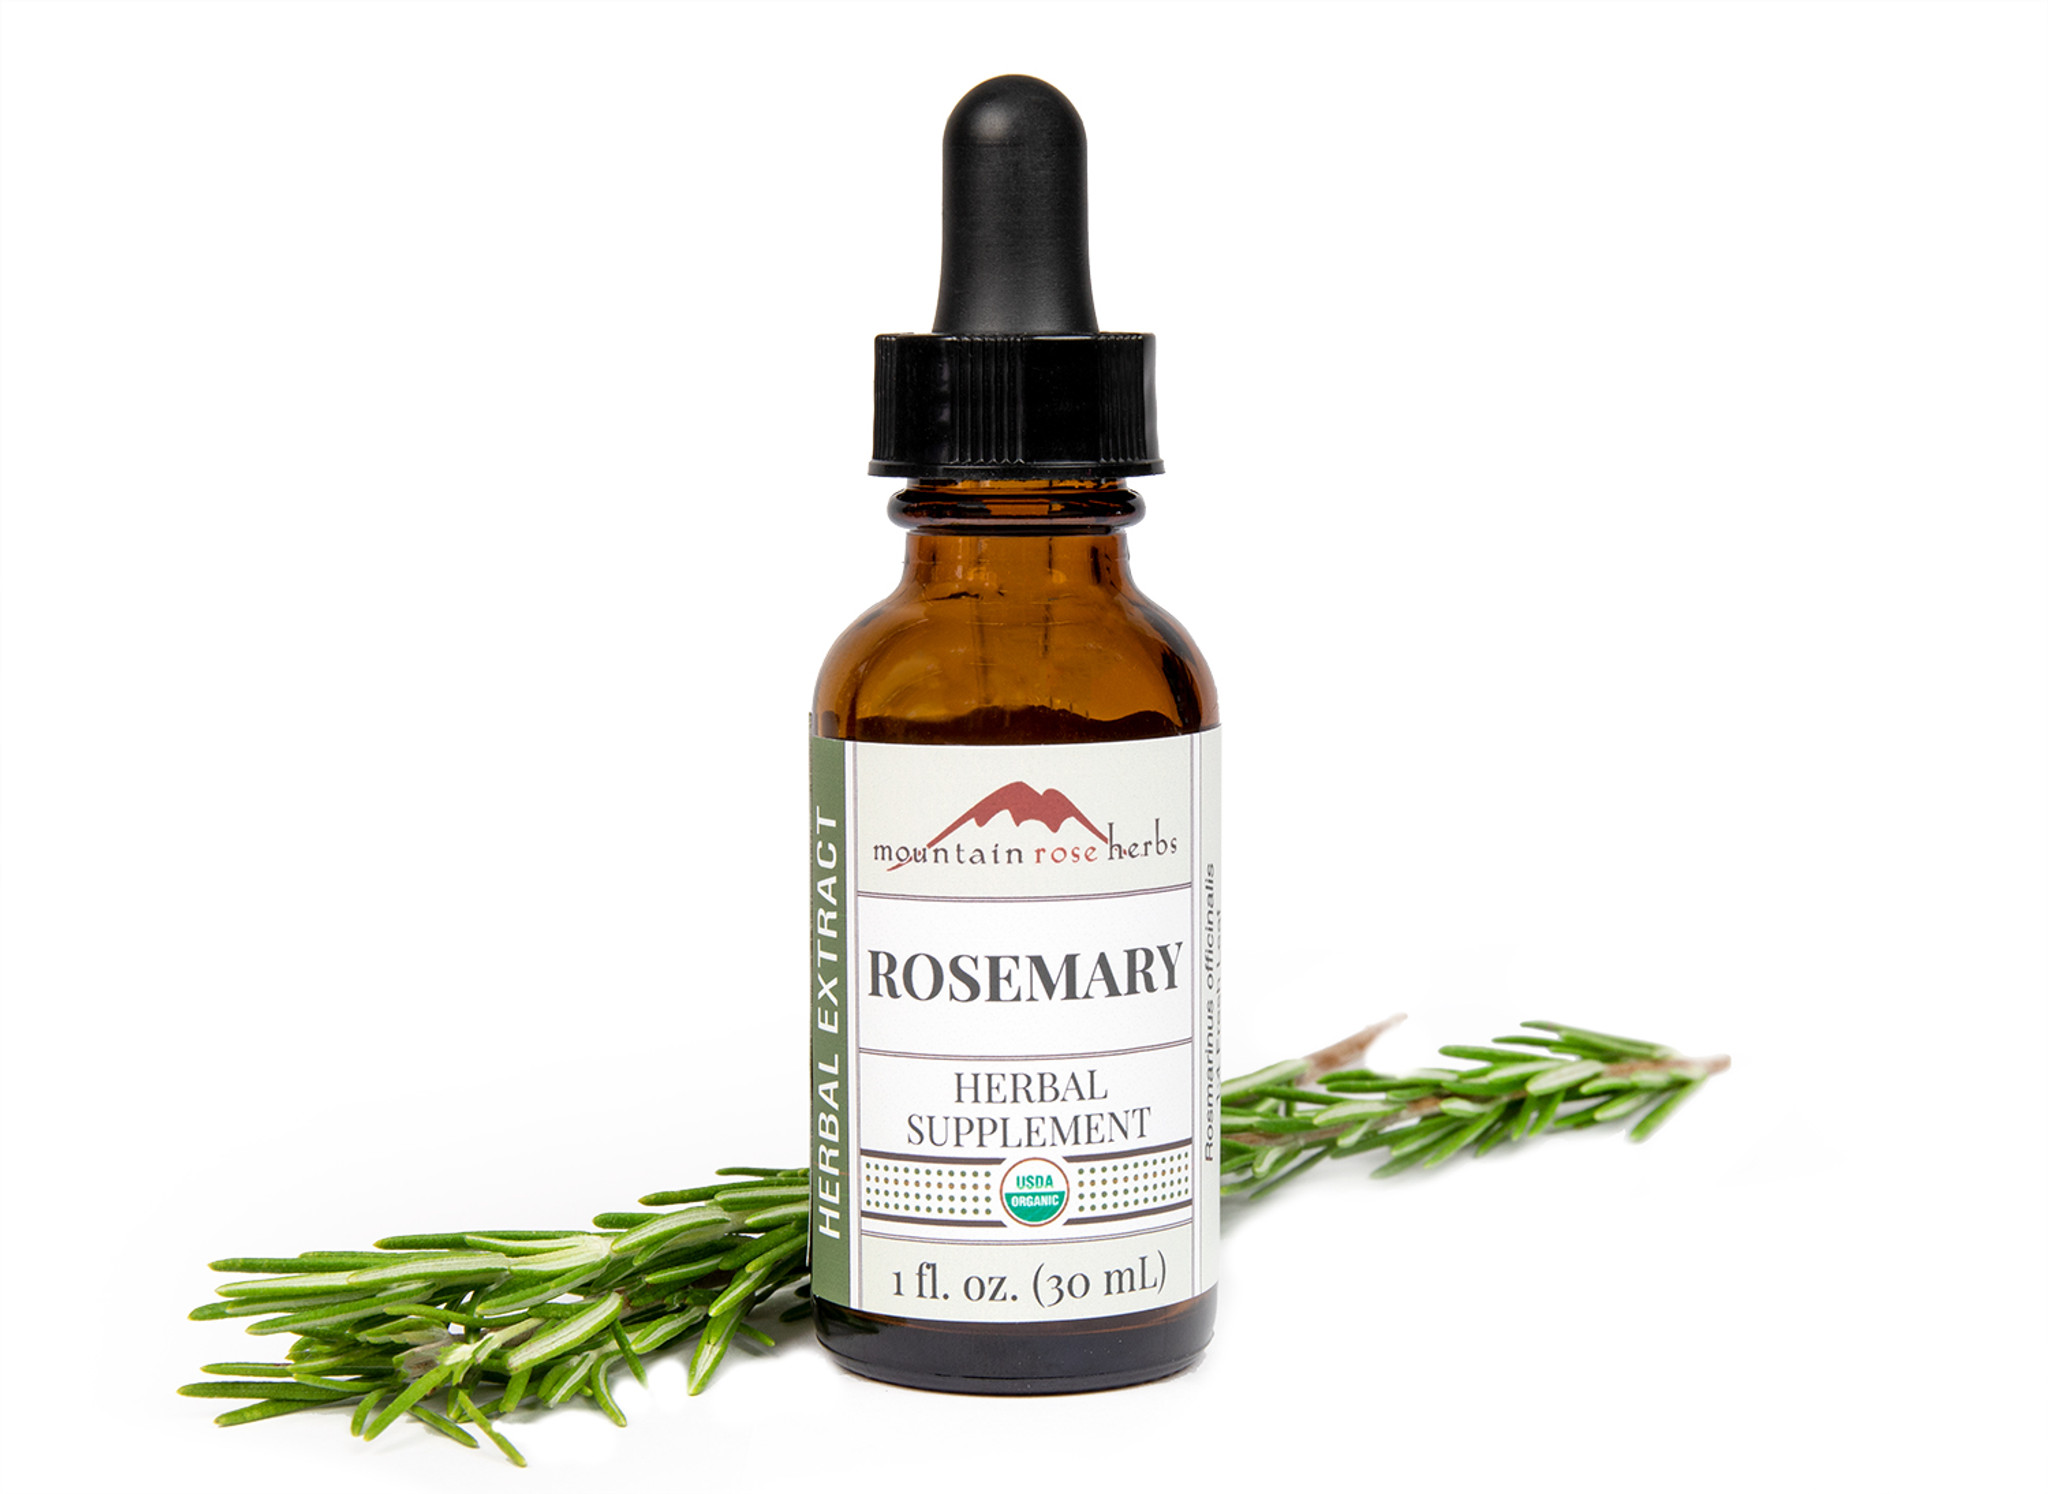 Rosemary Leaf Whole, Certified Organic 4 ounces, Mountain Rose